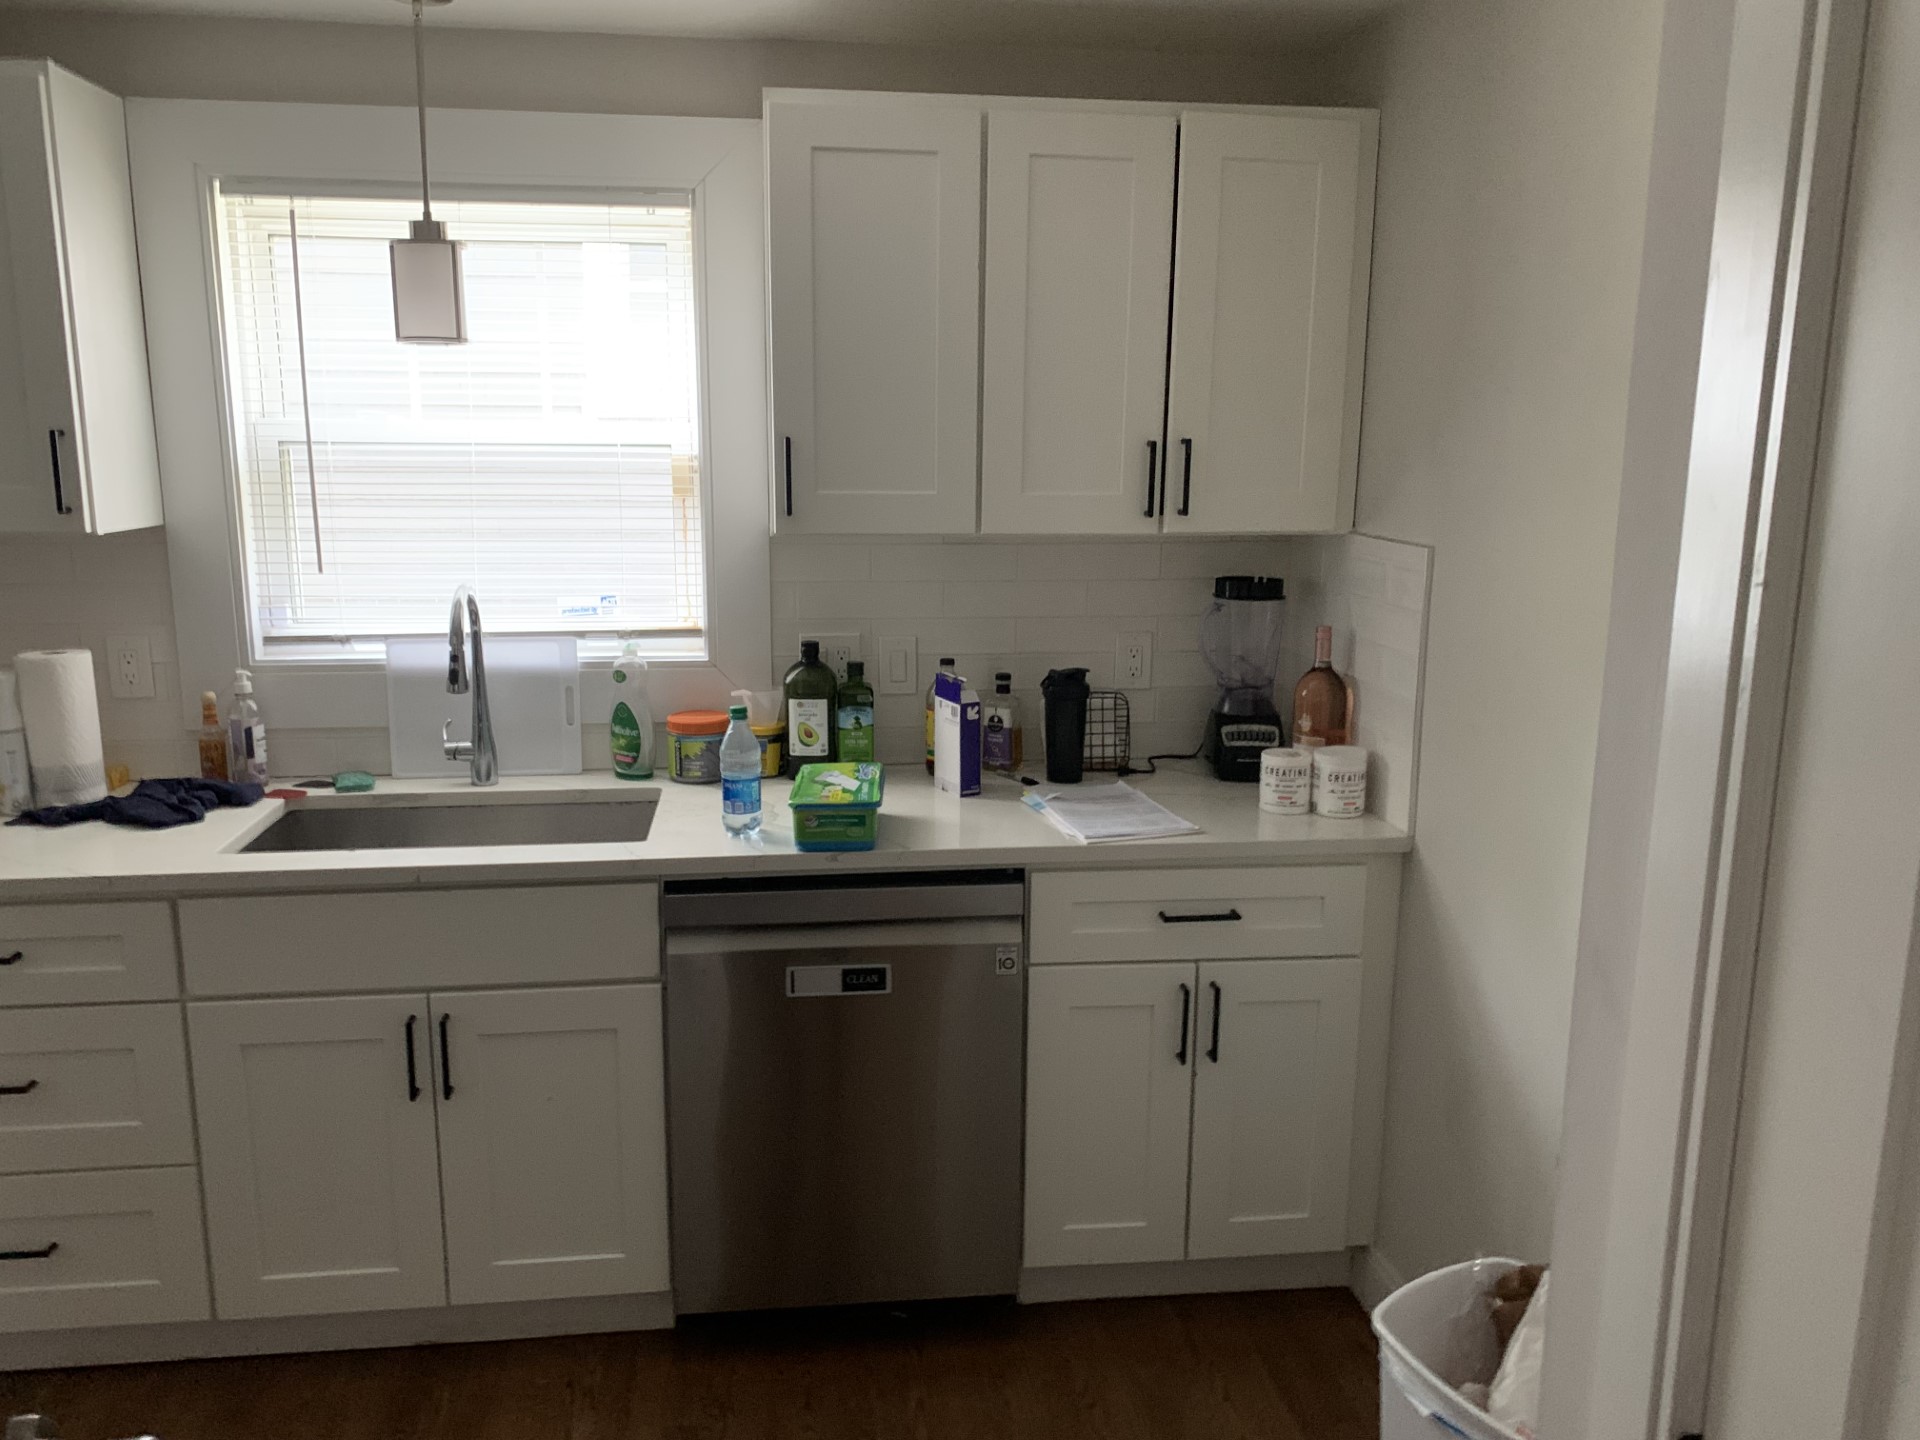 Photos of apartment on Greycliff Rd.,Boston MA 02135